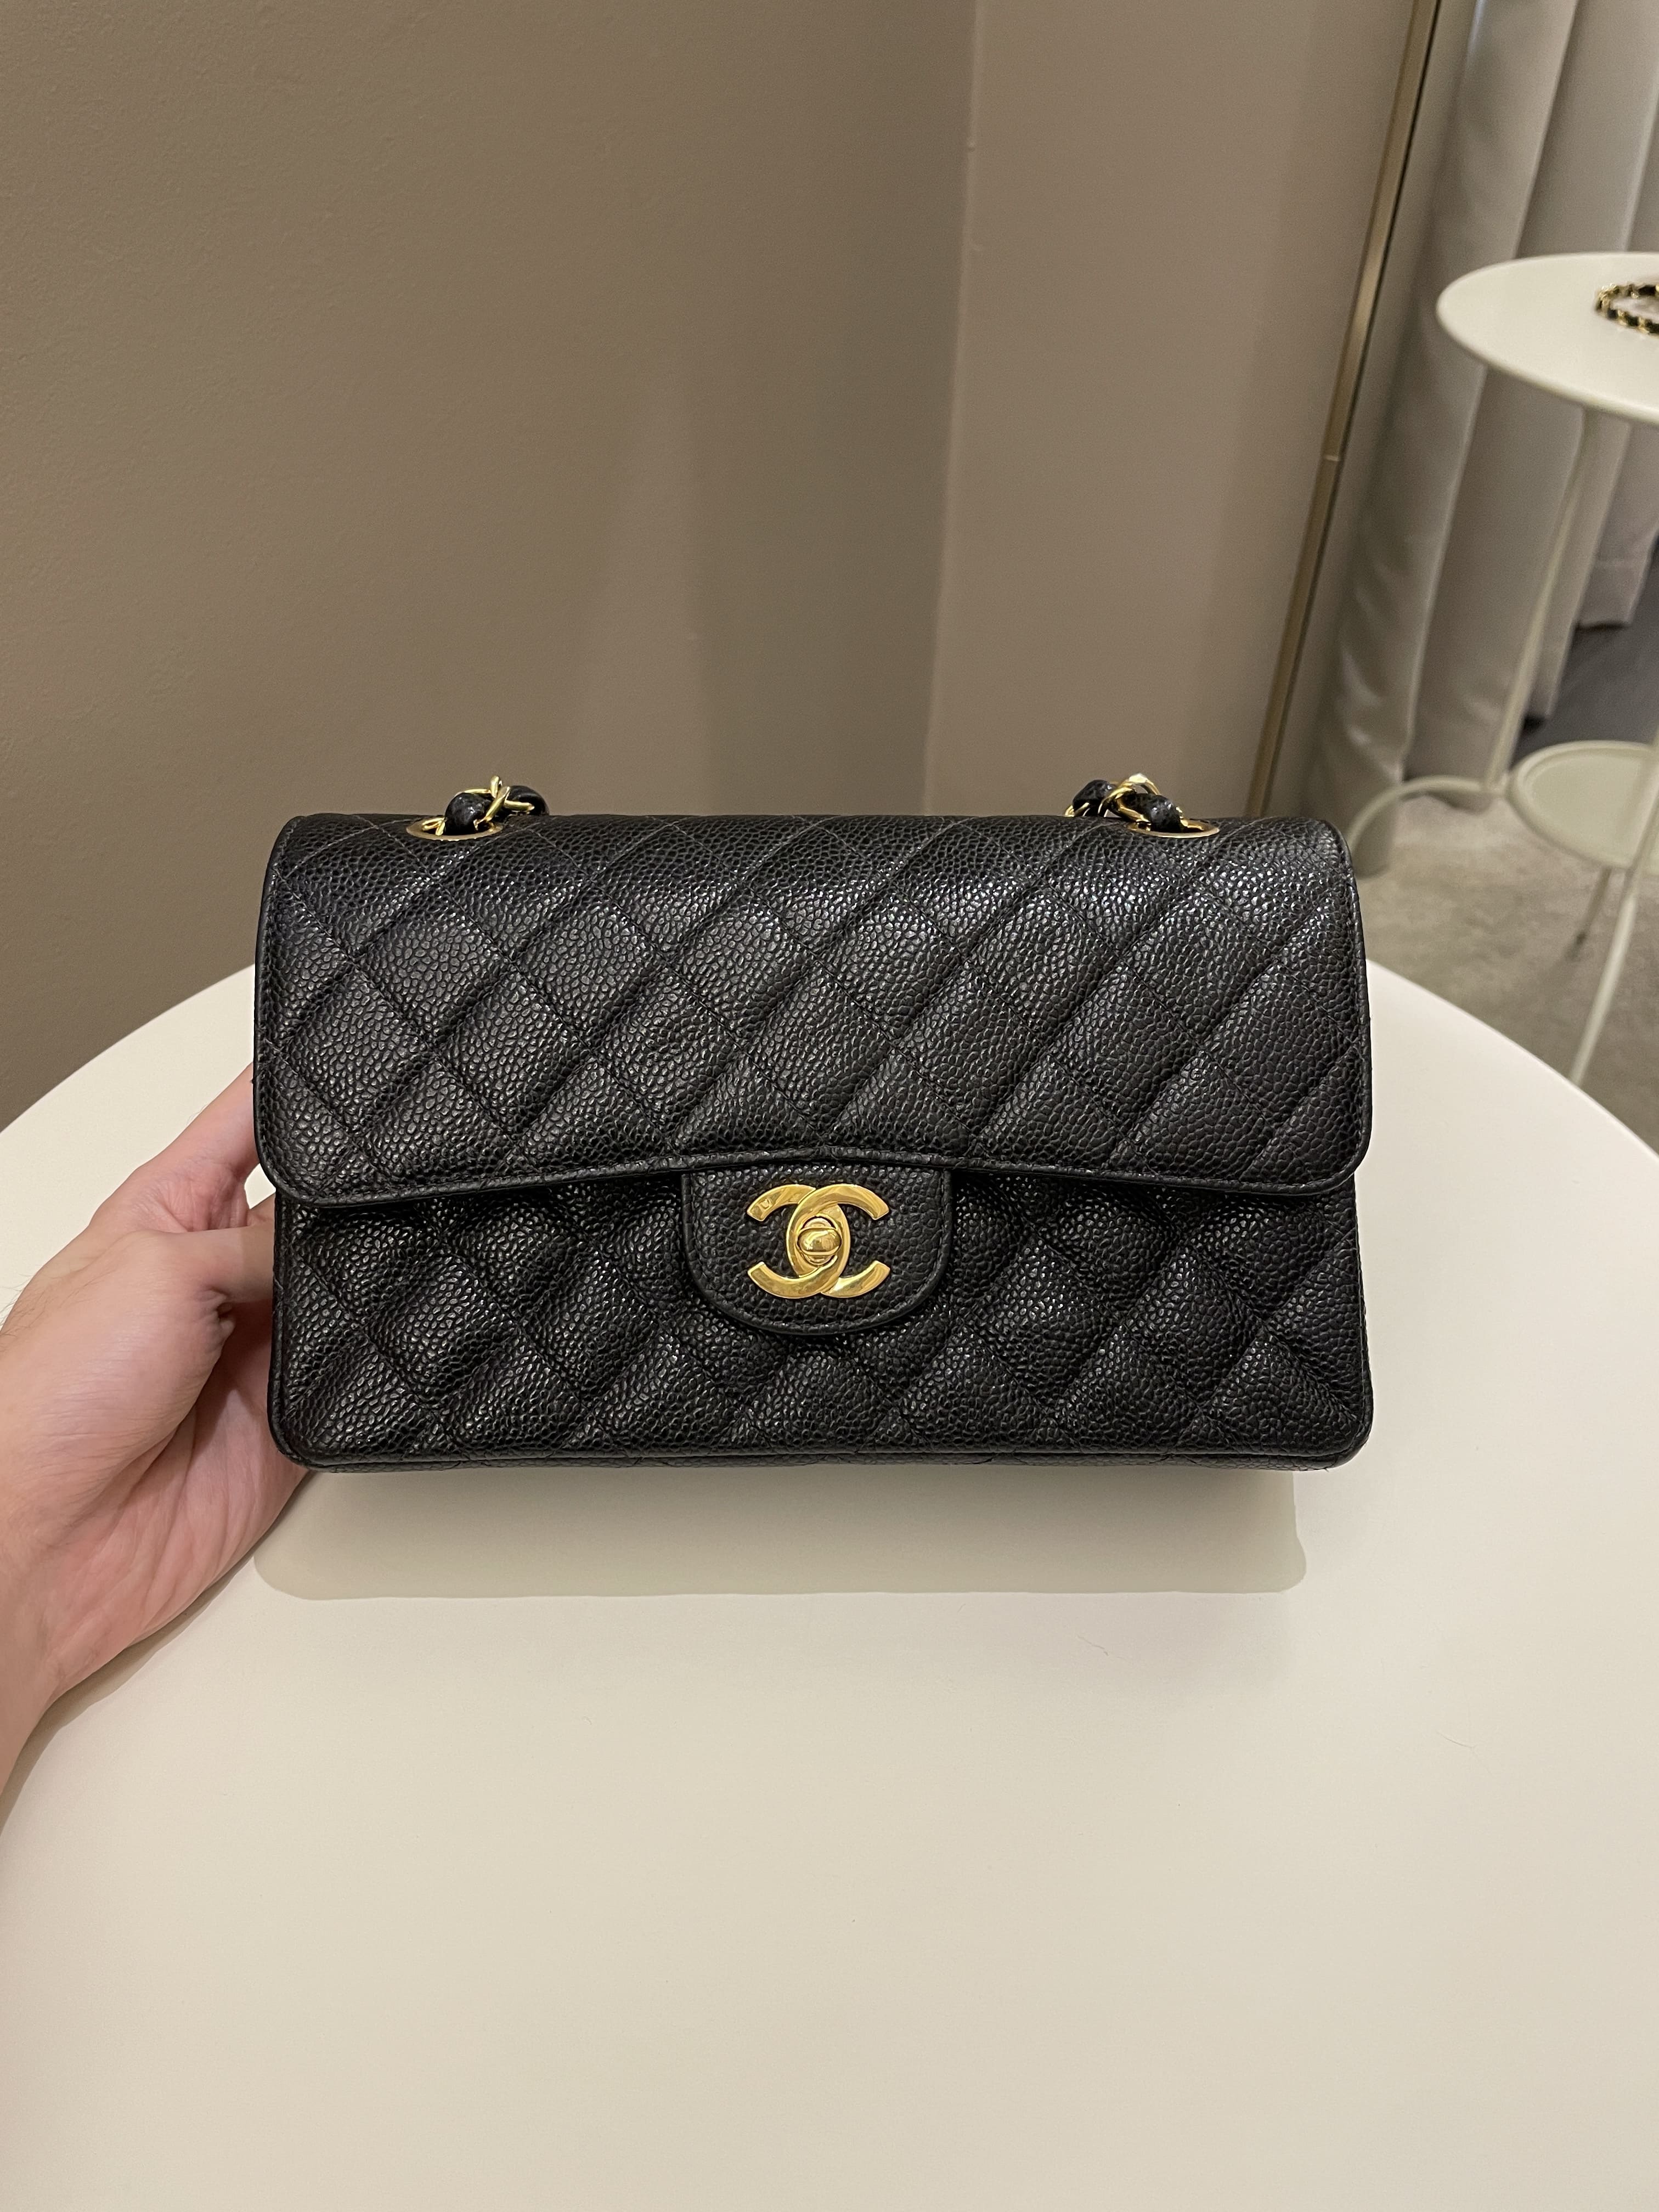 Chanel Black Small Classic Double Flap Bag for Sale in San Diego